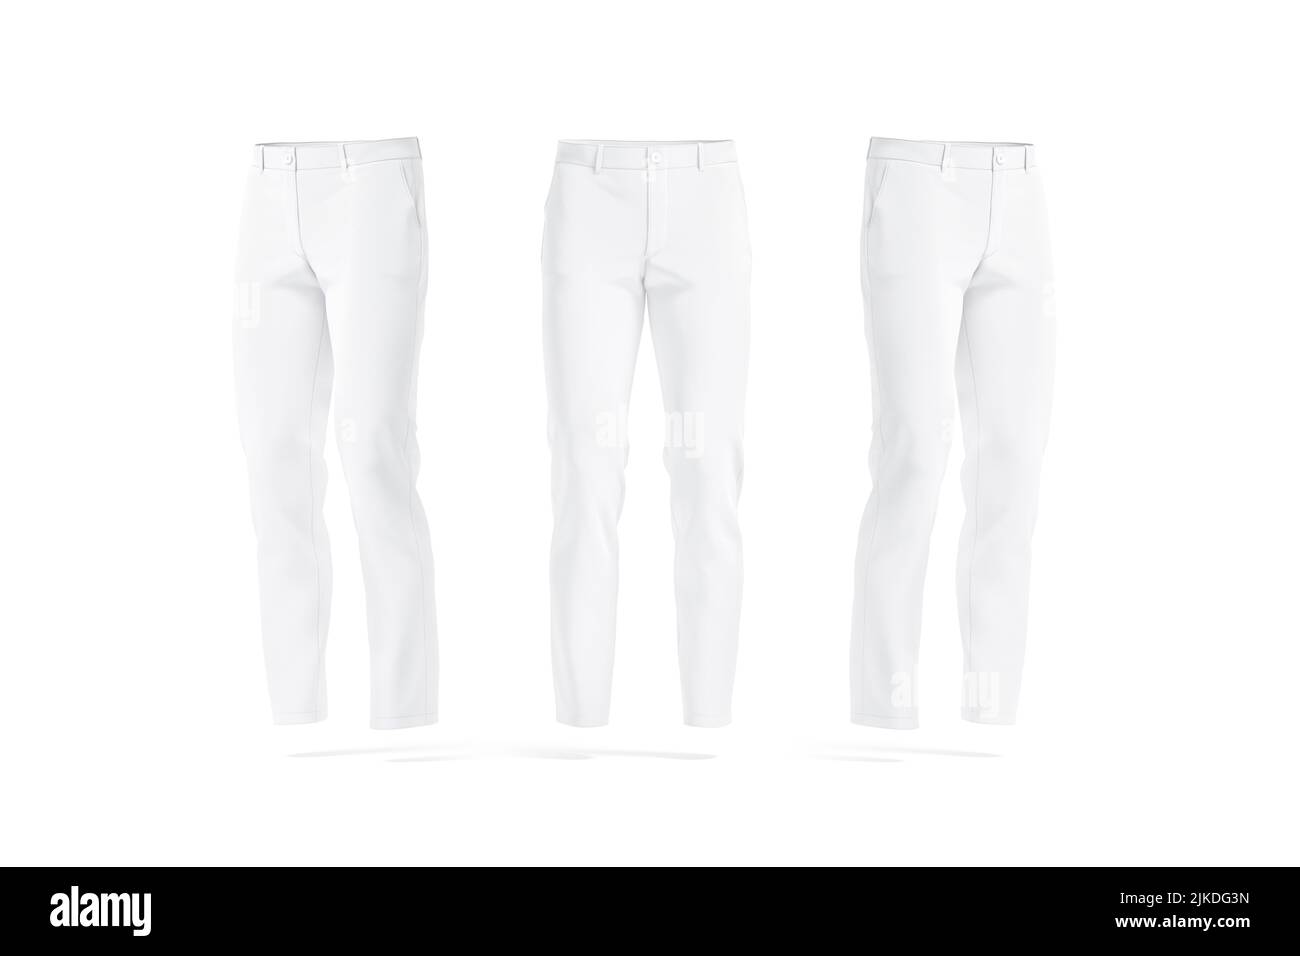 Blank white man pants mockup, front and side view Stock Photo